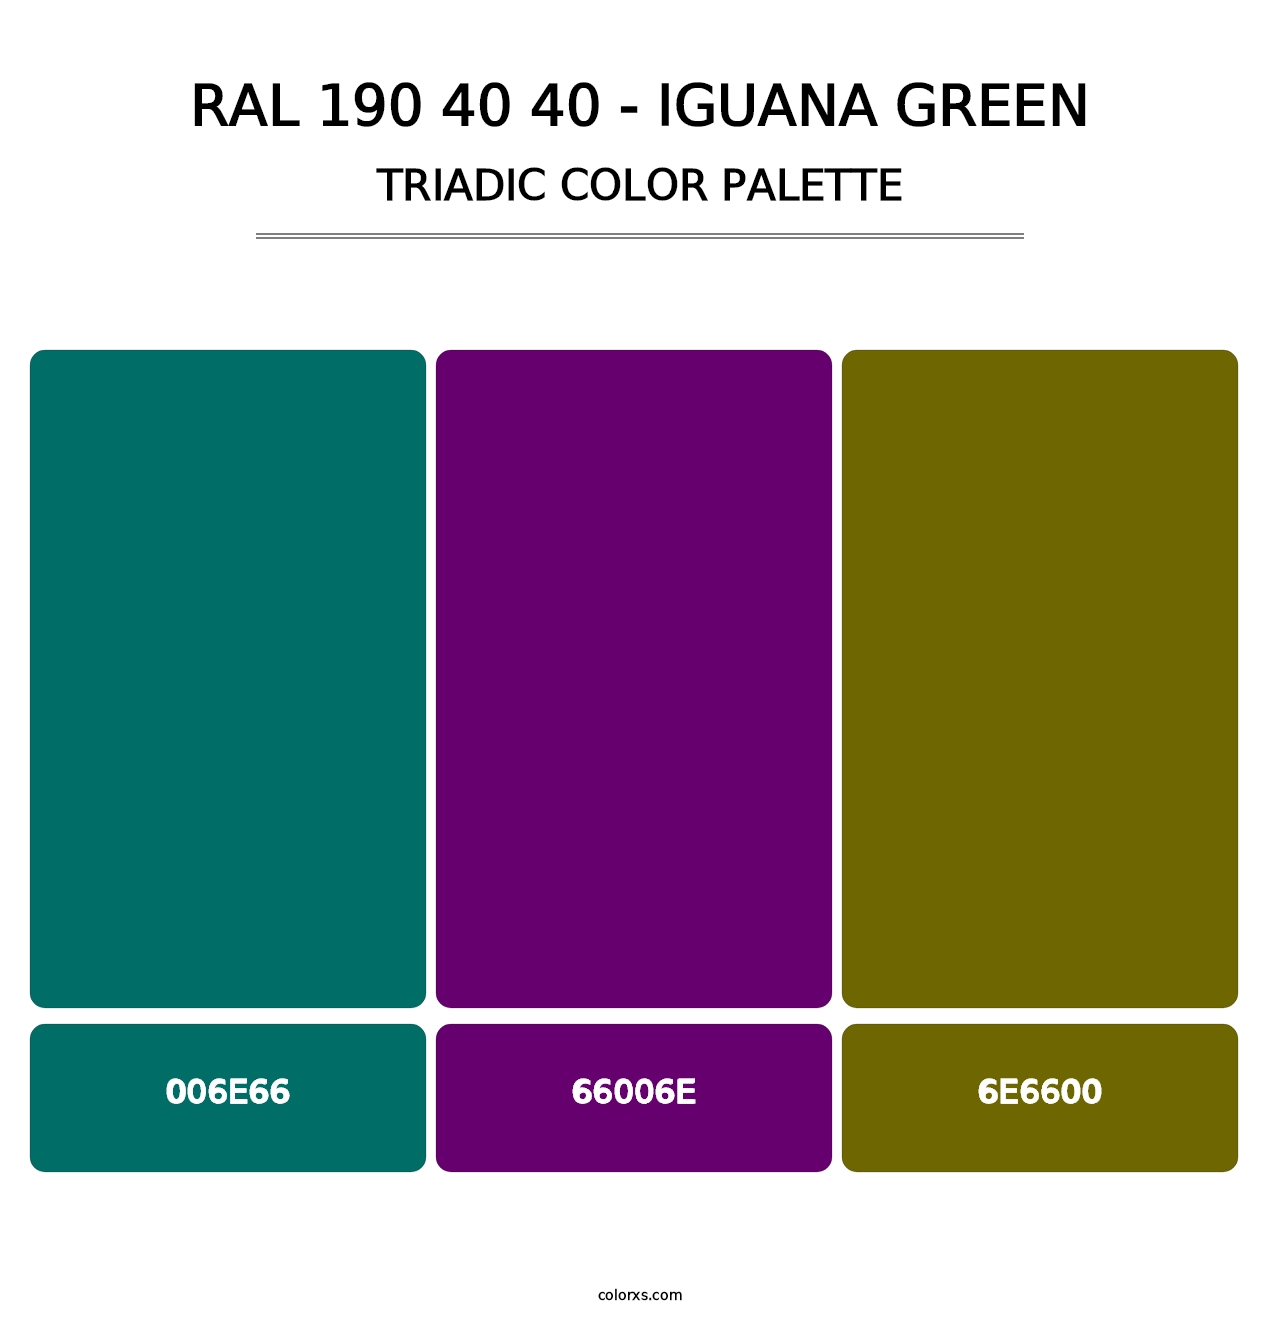 RAL 190 40 40 - Iguana Green - Triadic Color Palette